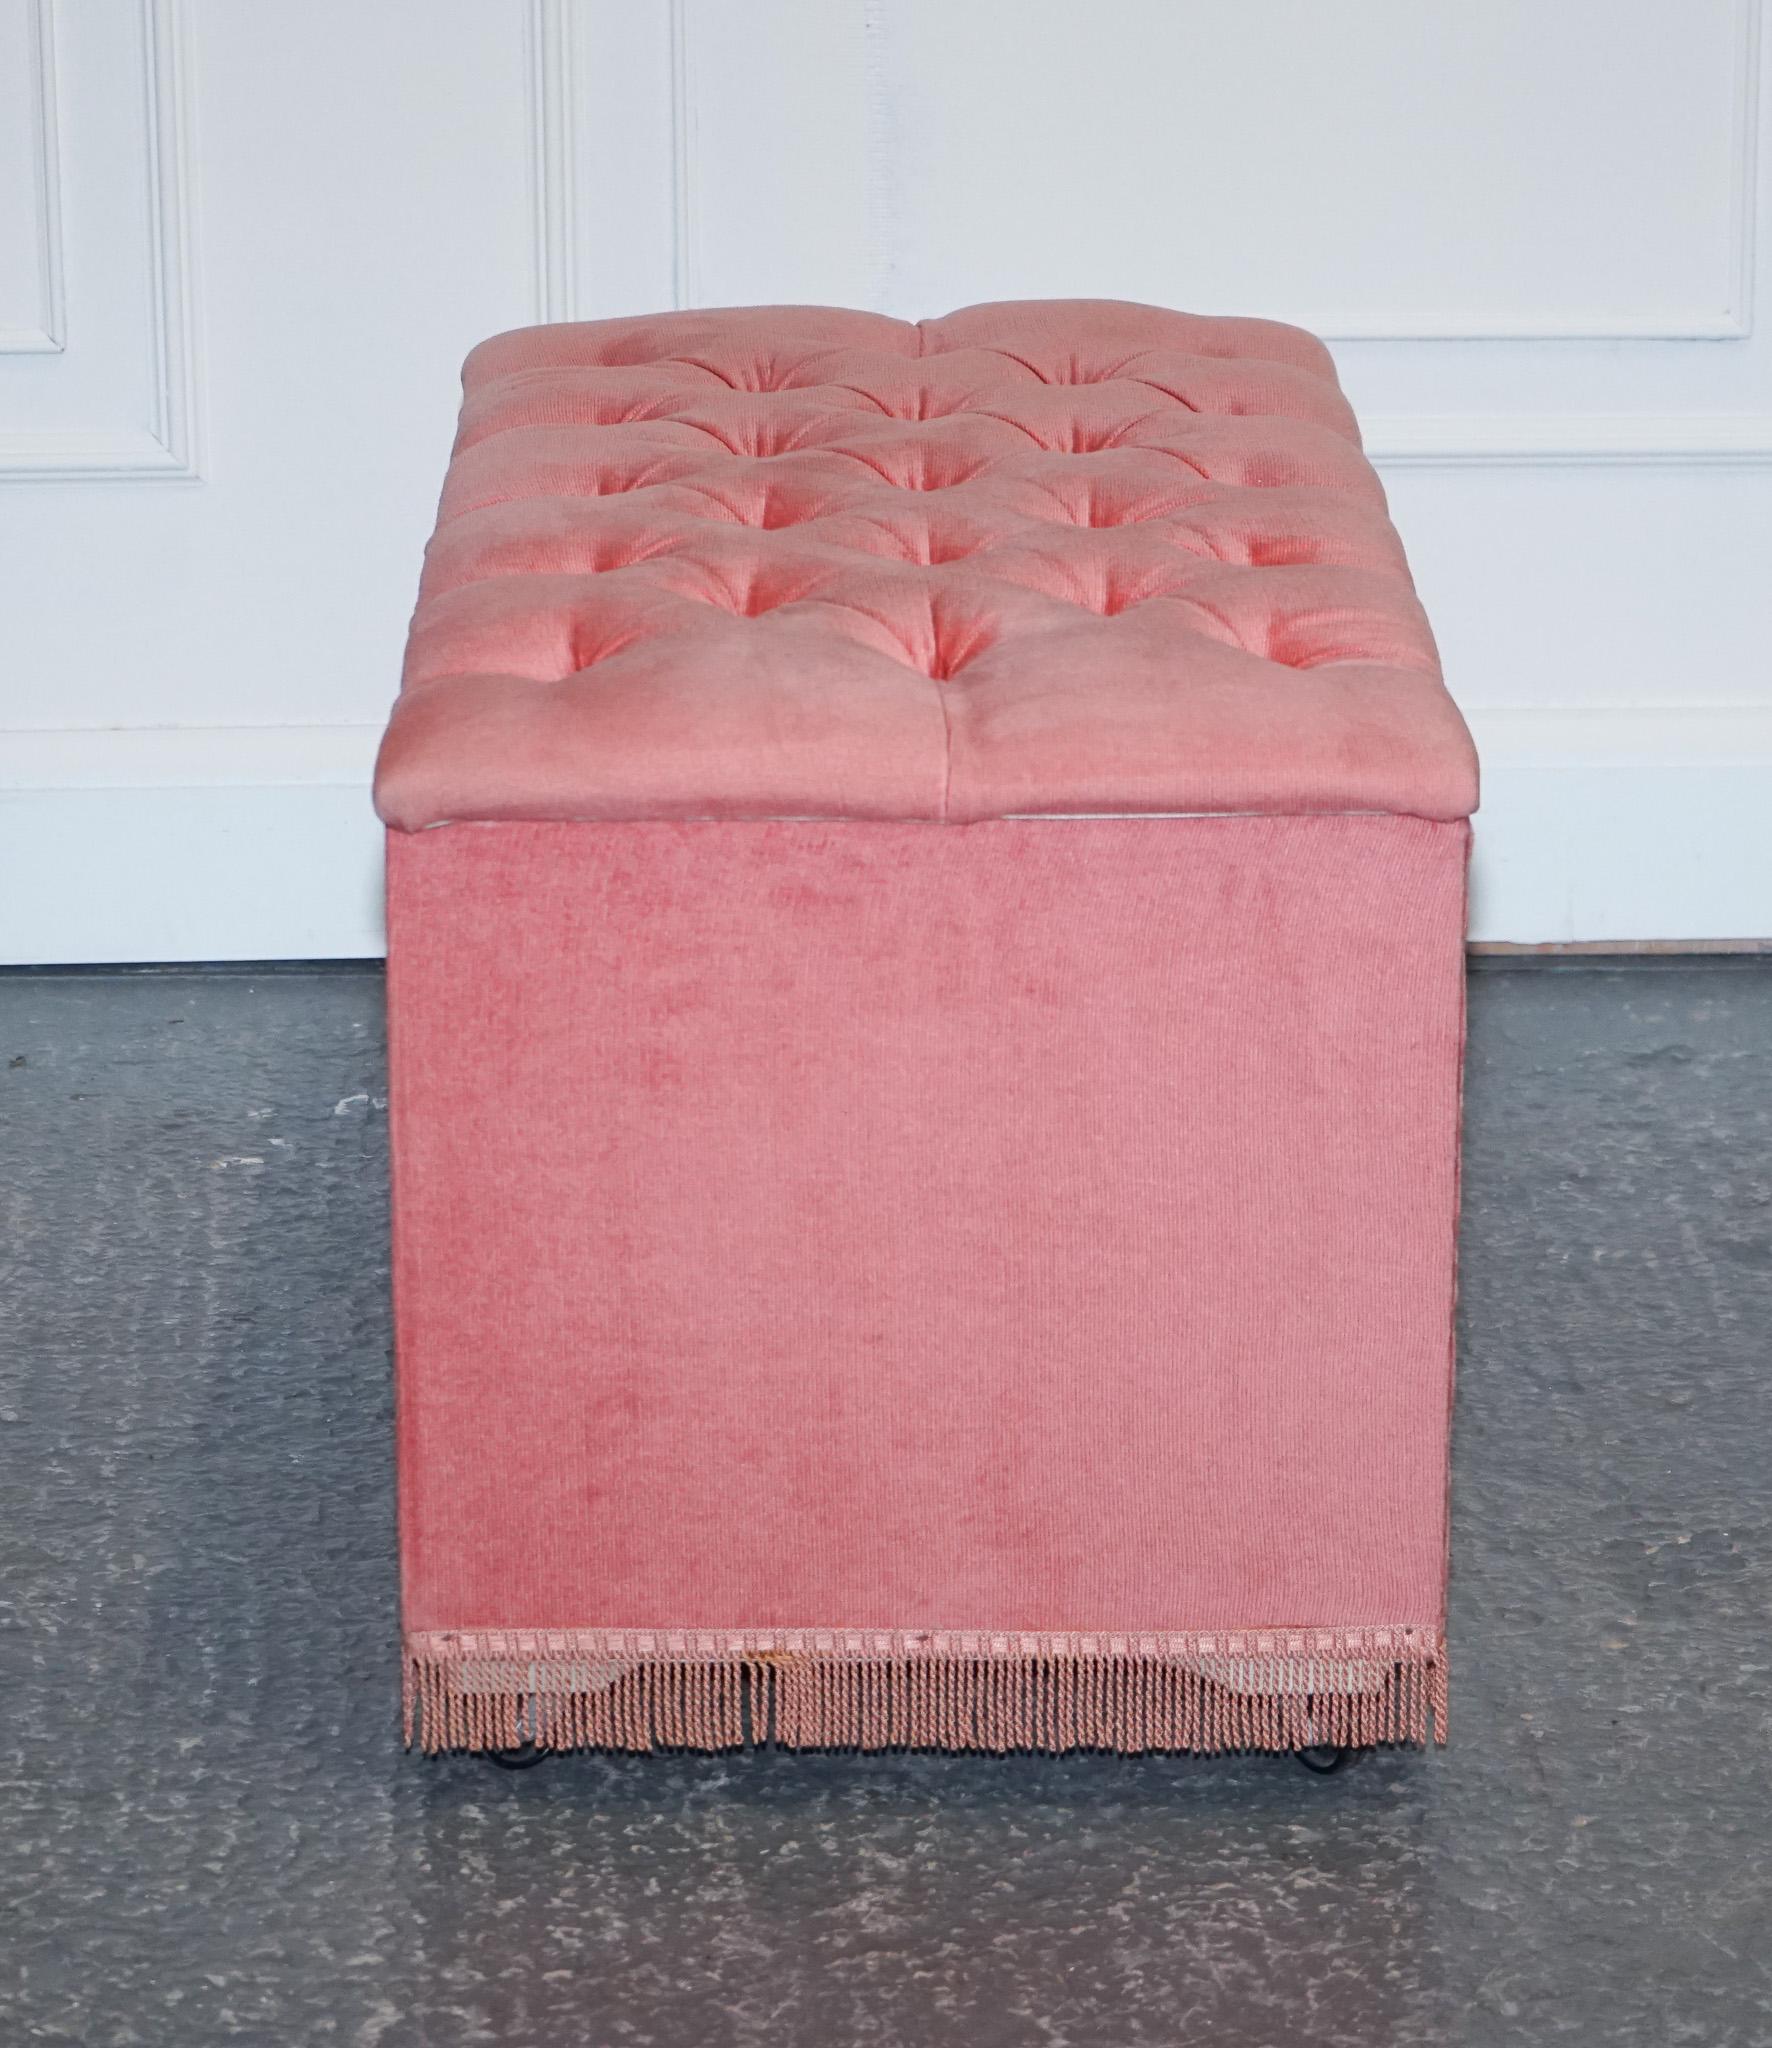 British Vintage 1960s Large Tuffed Ottoman Bed End Storage Chest Box Trunk Fringed For Sale